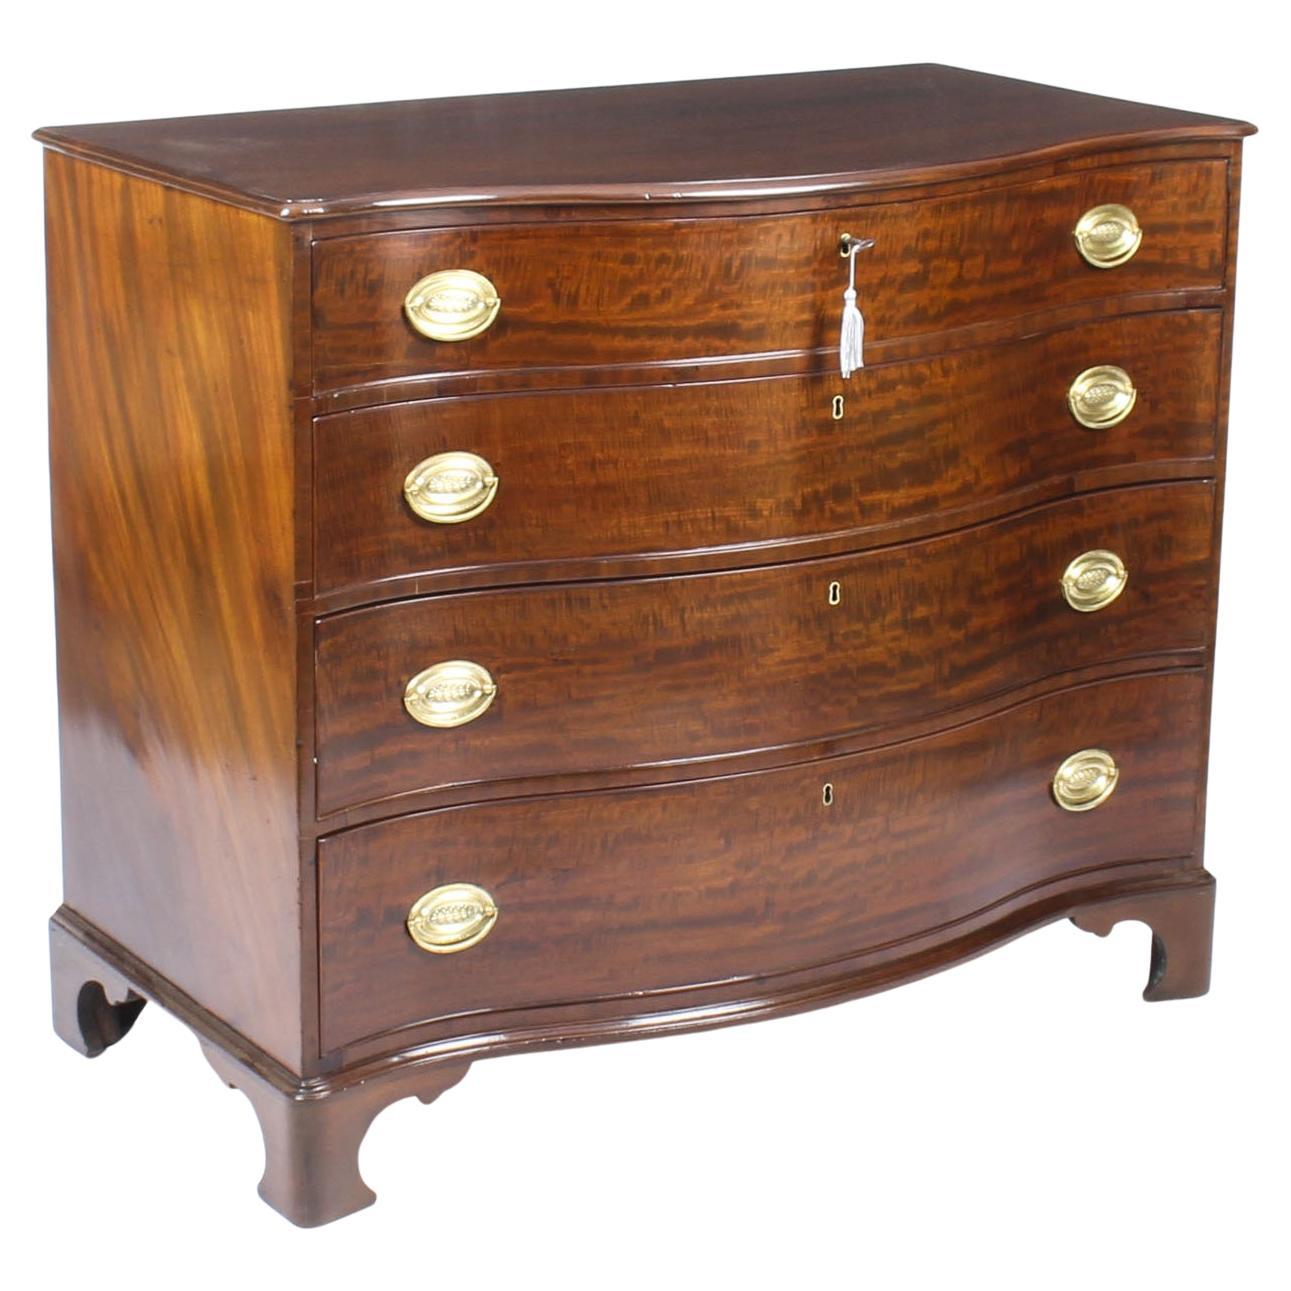 Antique George III Serpentine Flame Mahogany Chest Drawers, 18th Century